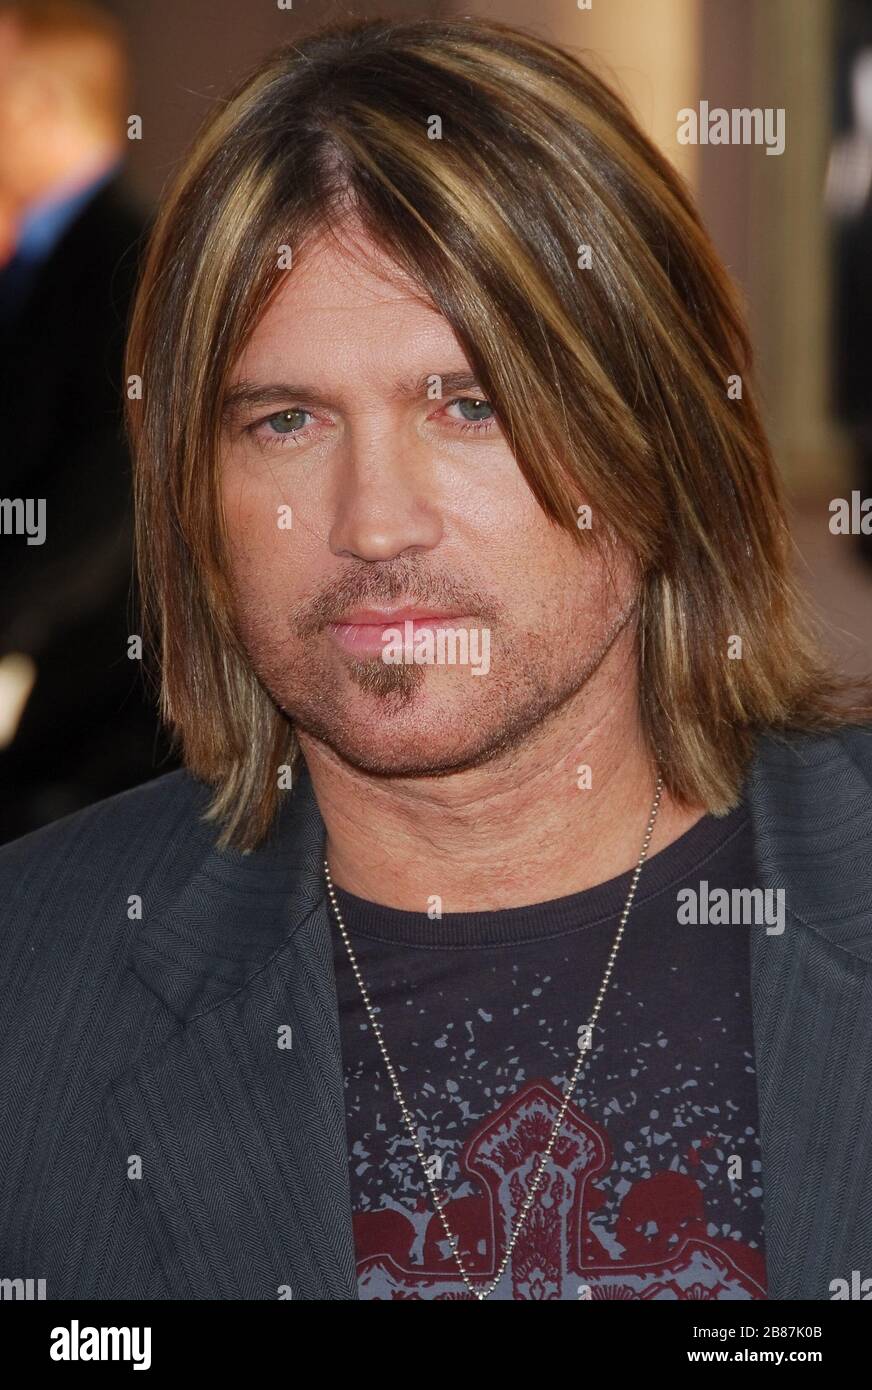 Billy Ray Cyrus at the 34th Annual American Music Awards held at the Shrine Auditorium in Los Angeles, CA. The event took place on Tuesday, November 21, 2006.  Photo by: SBM / PictureLux - File Reference # 33984-9529SBMPLX Stock Photo